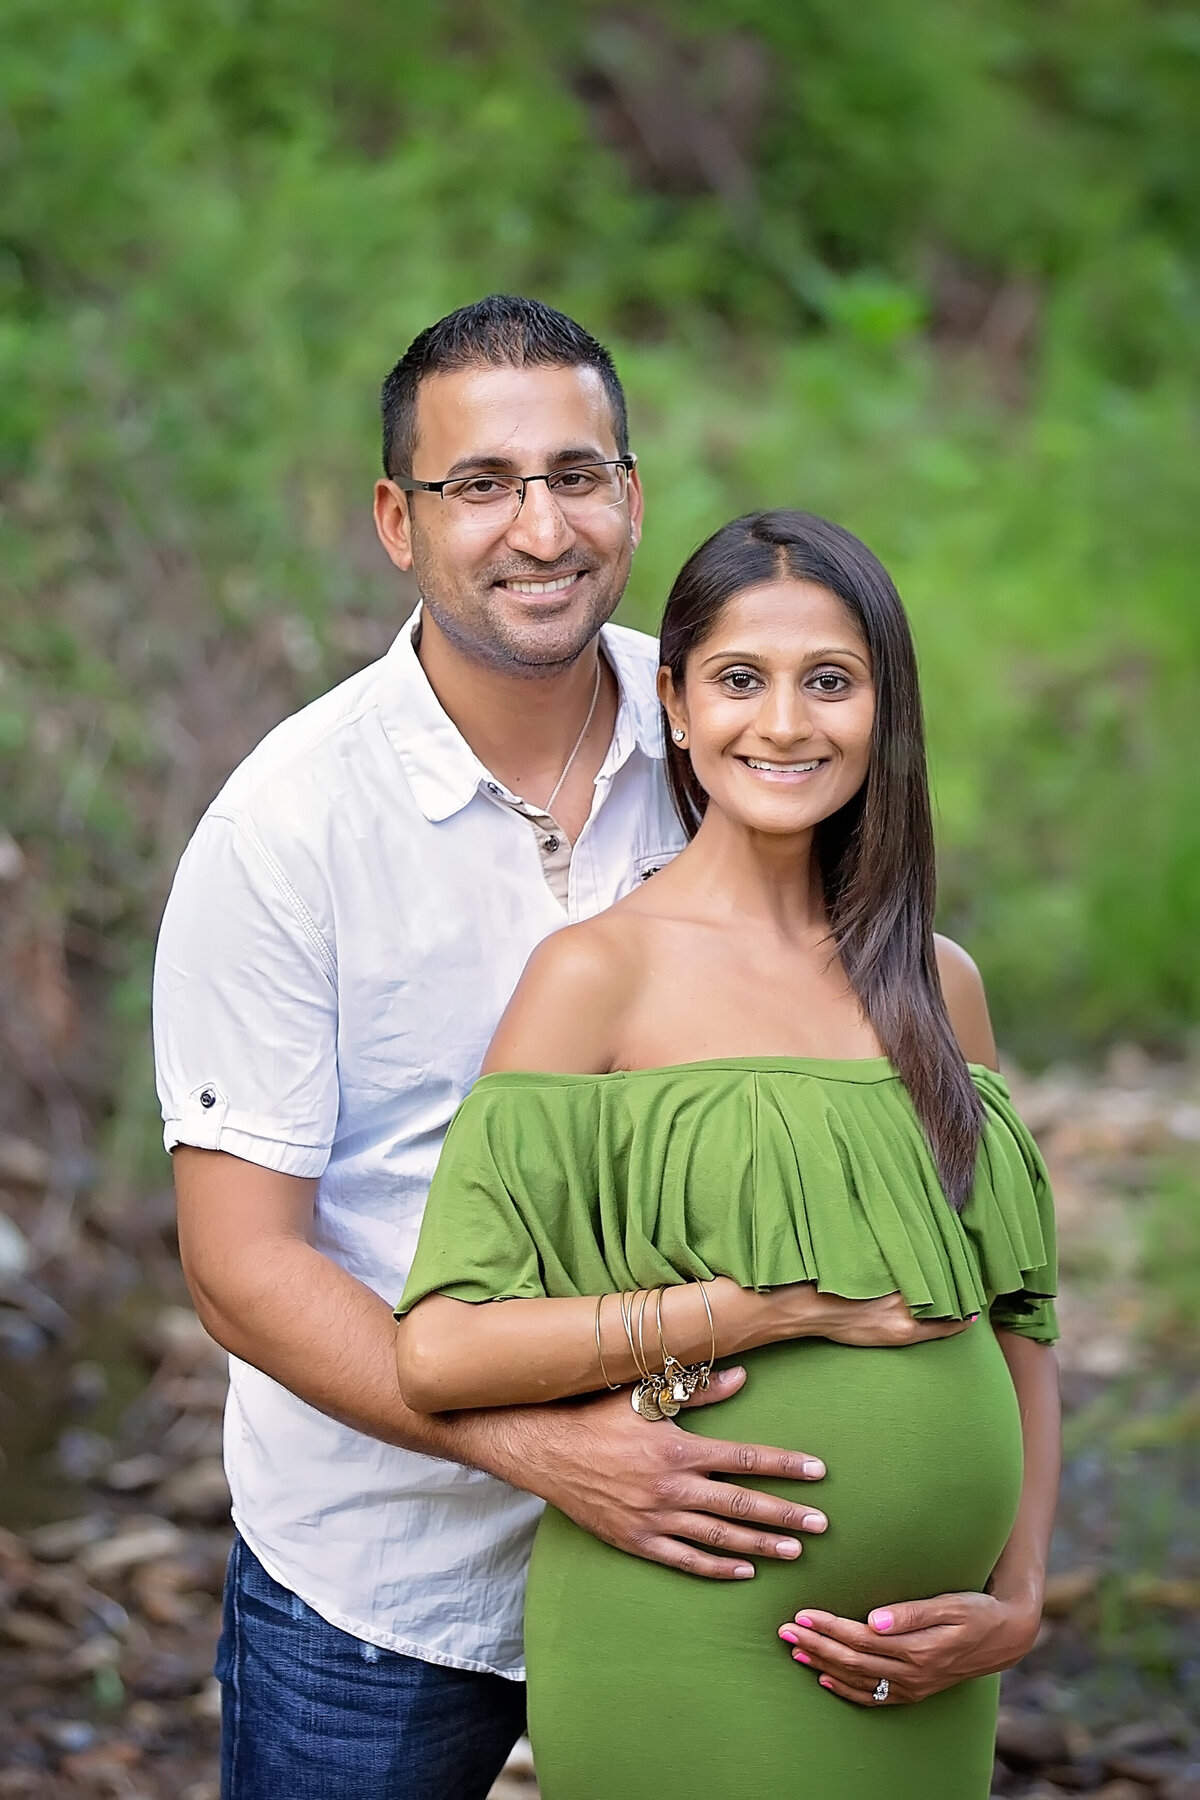 nj maternity couple posing for their pregnancy portraits in a local park